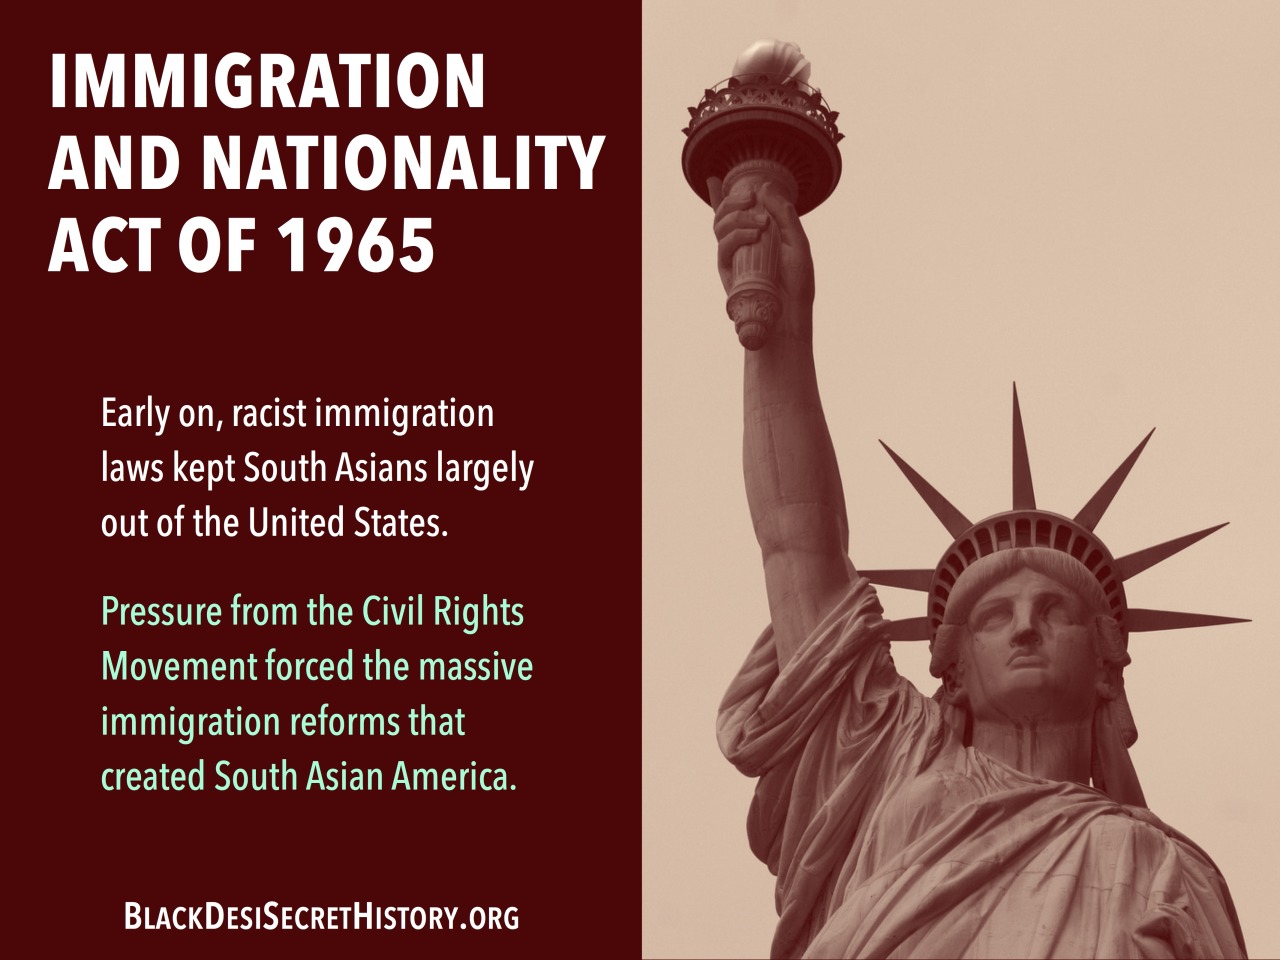 IMMIGRATION AND NATIONALITY ACT OF 1965: Early on, racist immigration laws kept South Asians largely out of the United States. Pressure from the Civil Rights Movement forced the massive immigration reforms that created South Asian America.